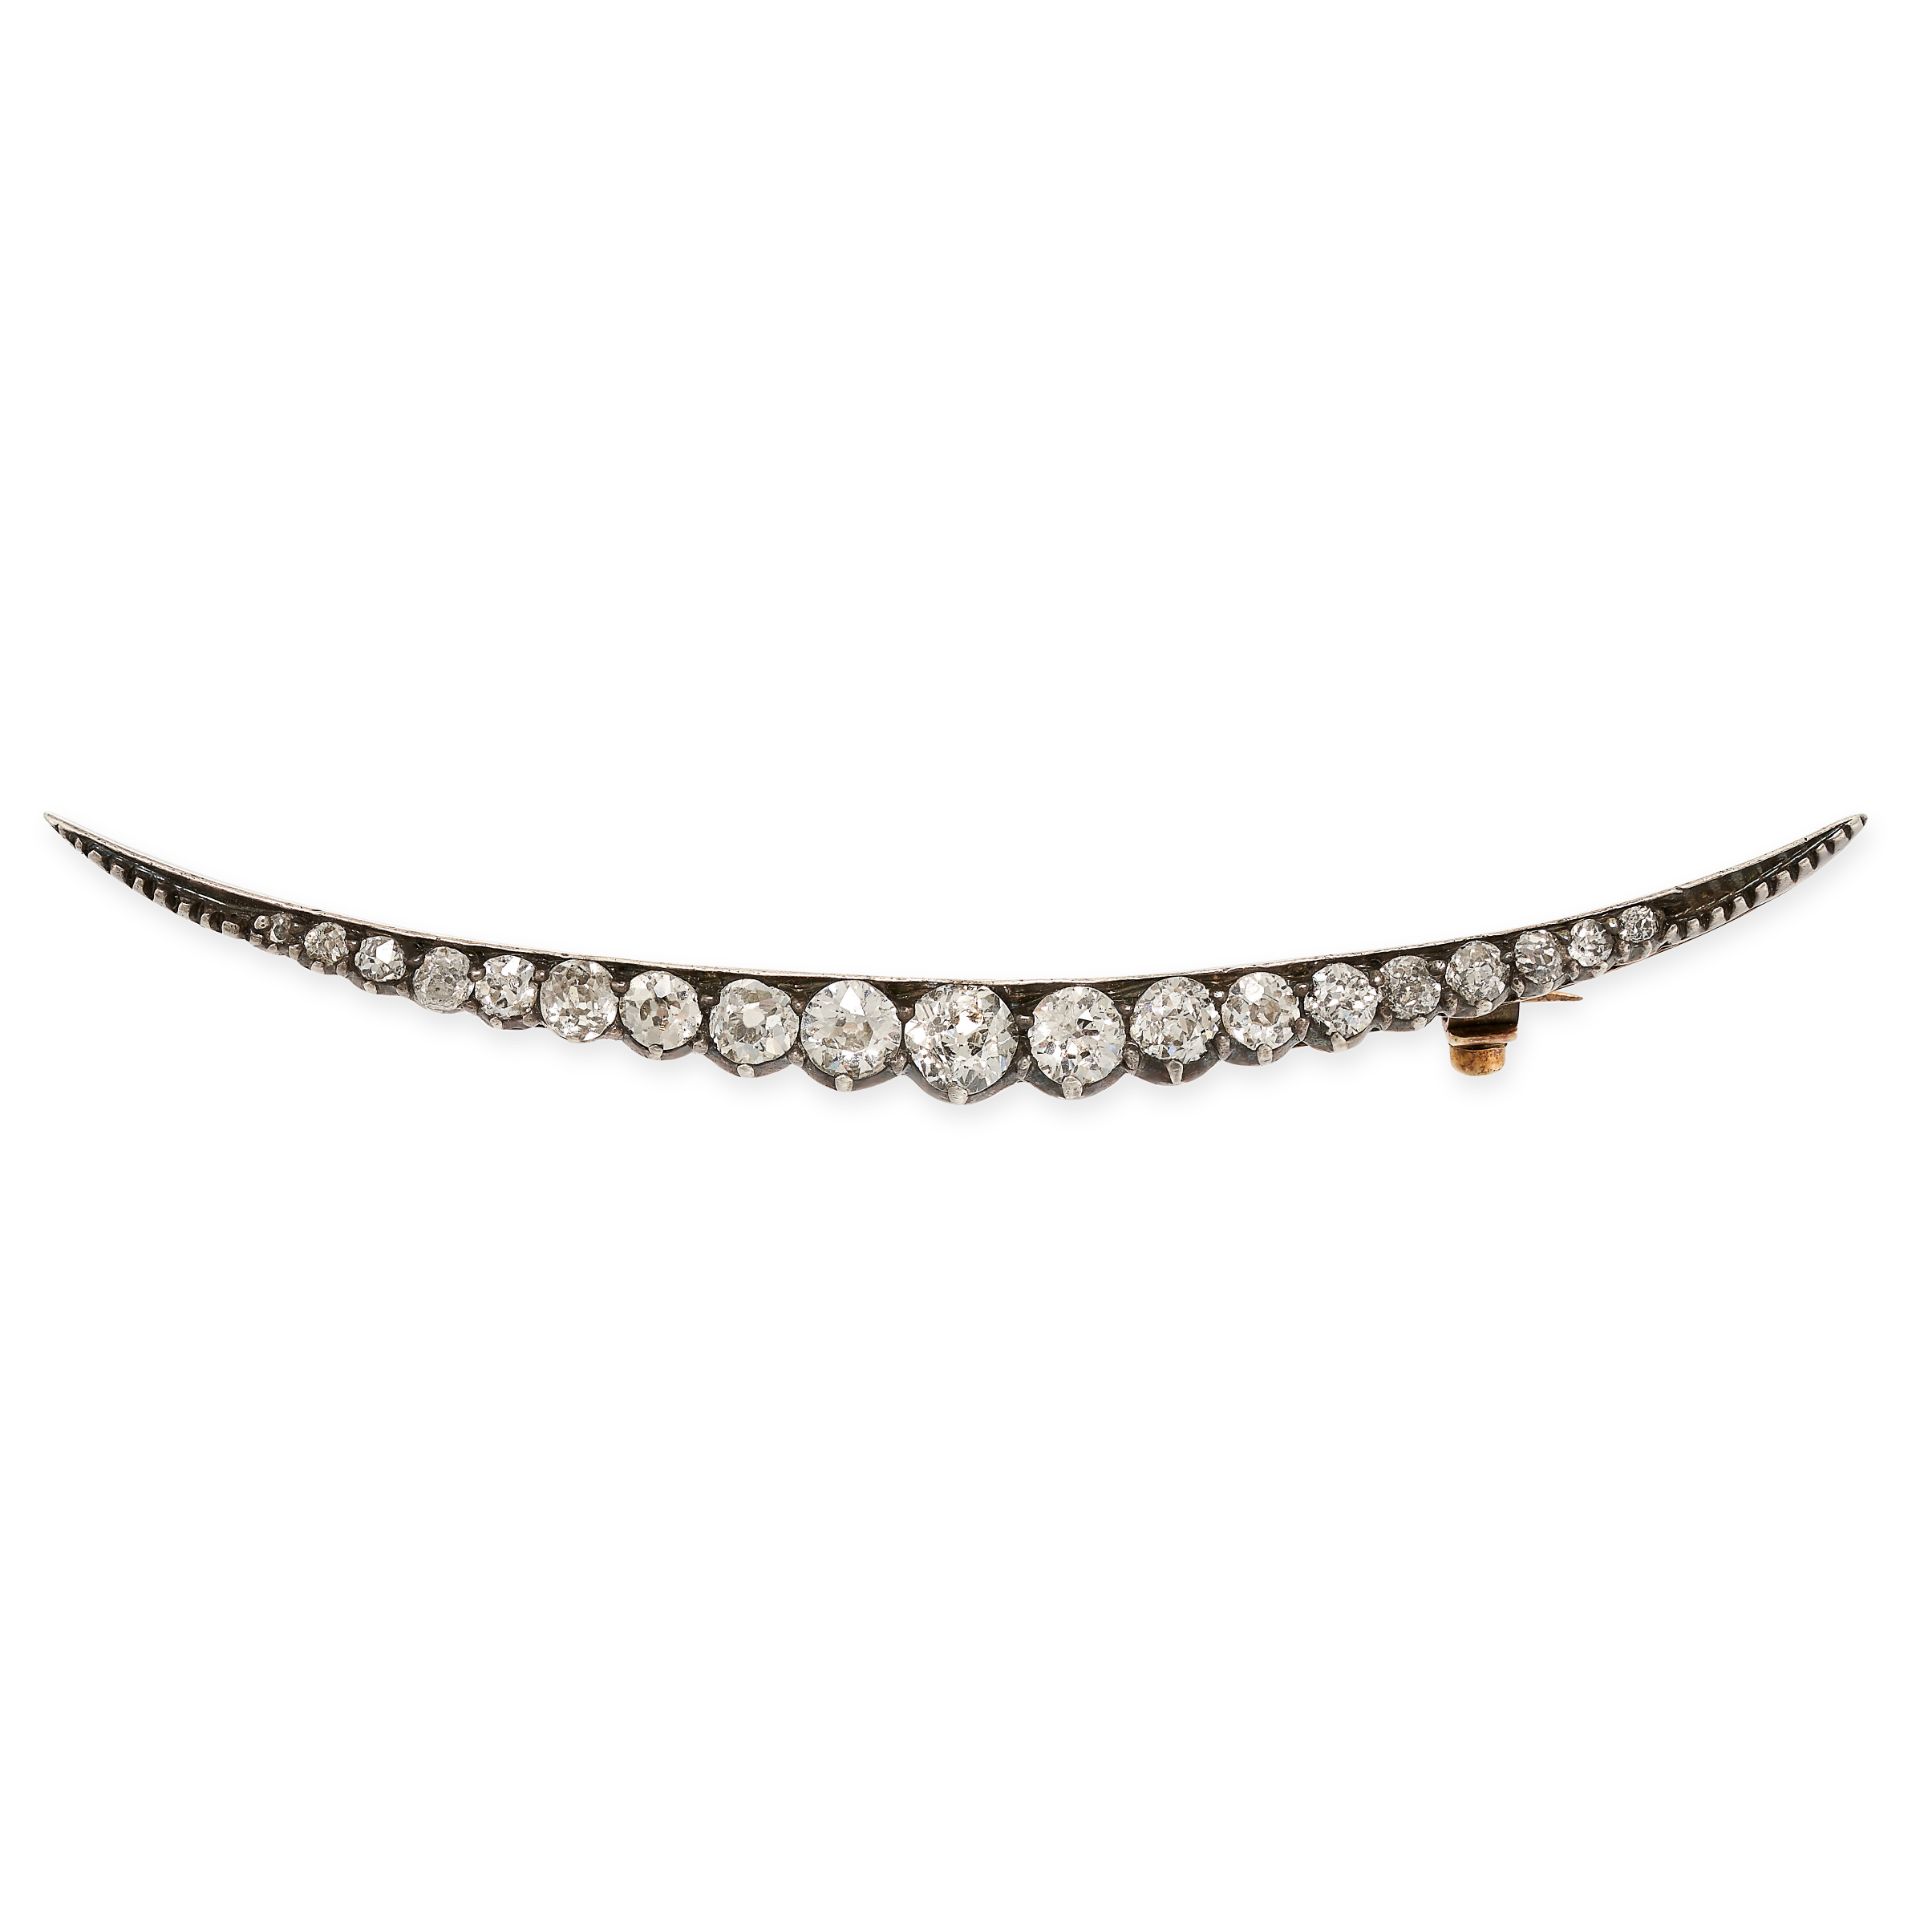 AN ANTIQUE DIAMOND CRESCENT MOON BROOCH, 19TH CENTURY in yellow gold and silver, set with graduating